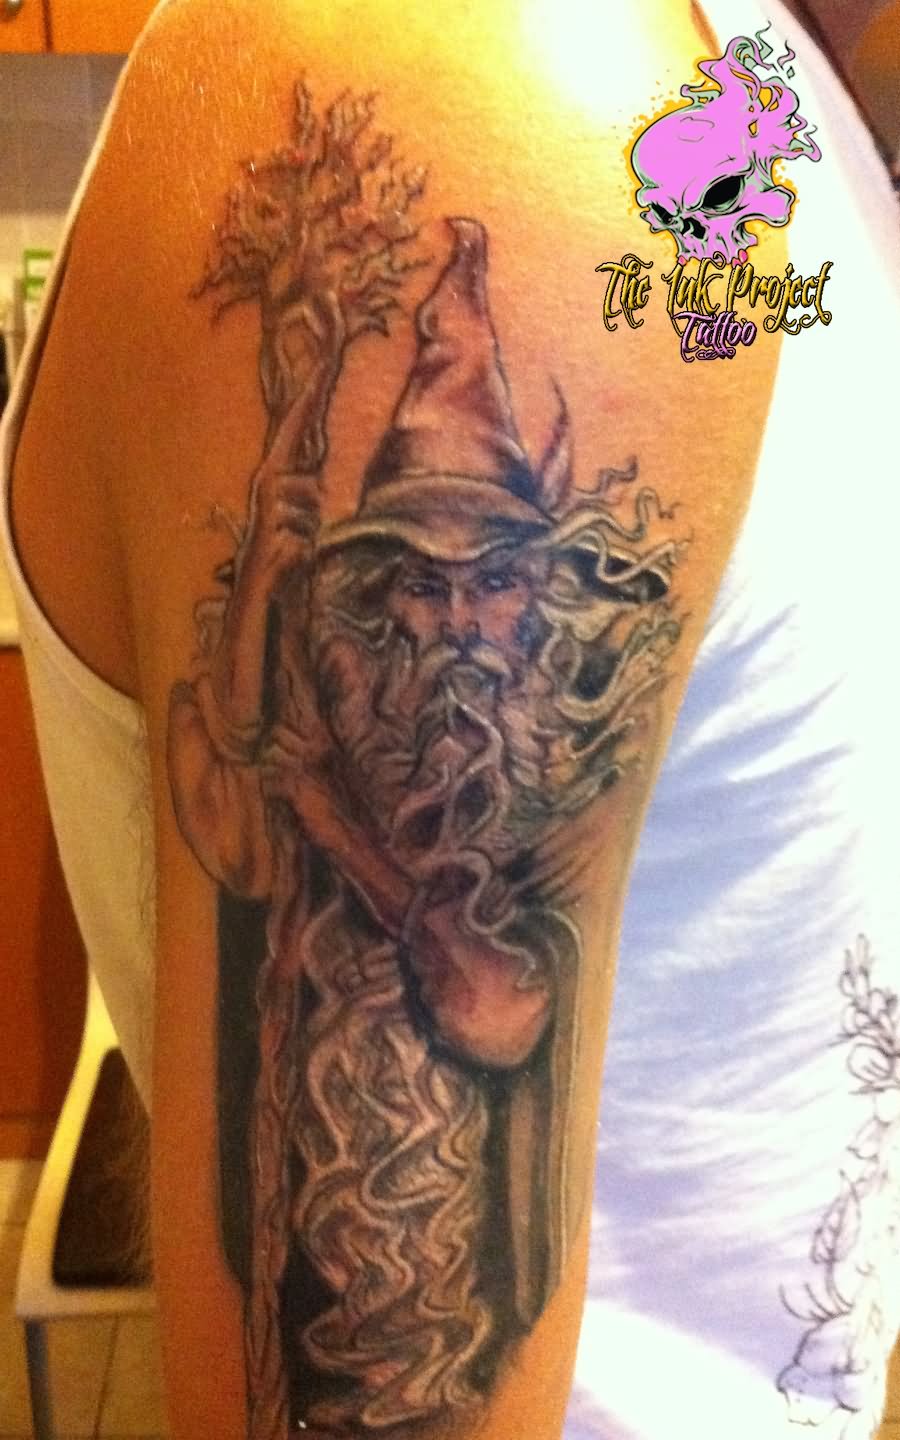 Wizard Tattoo On Right Half Sleeve by Giannialivertis